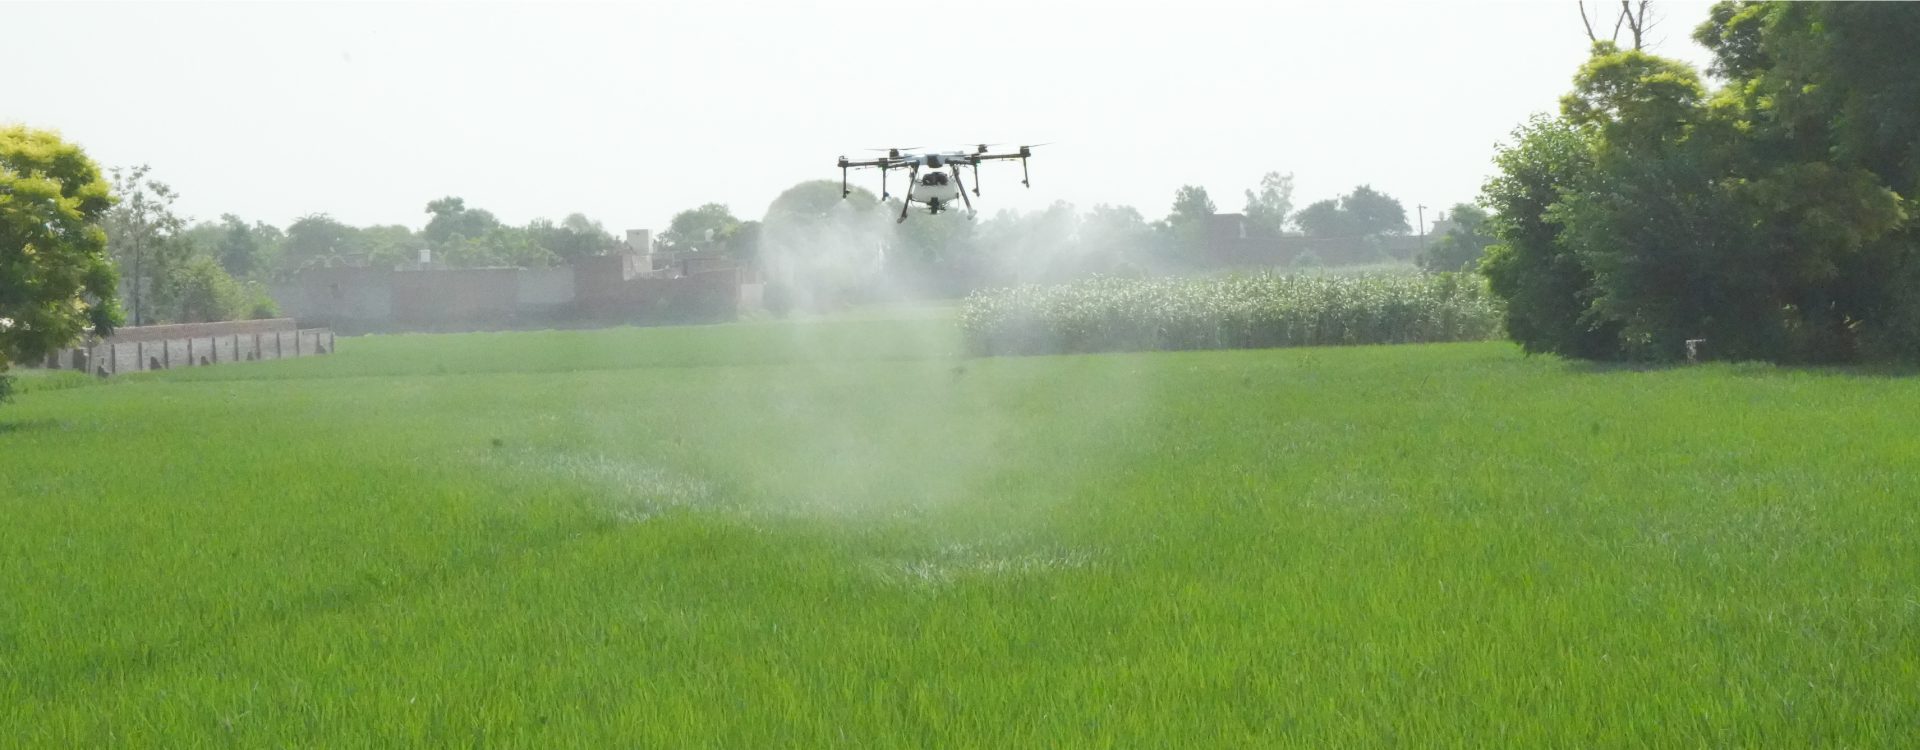 Best Agriculture Drone for Spraying Fertilizer and Pesticides in India